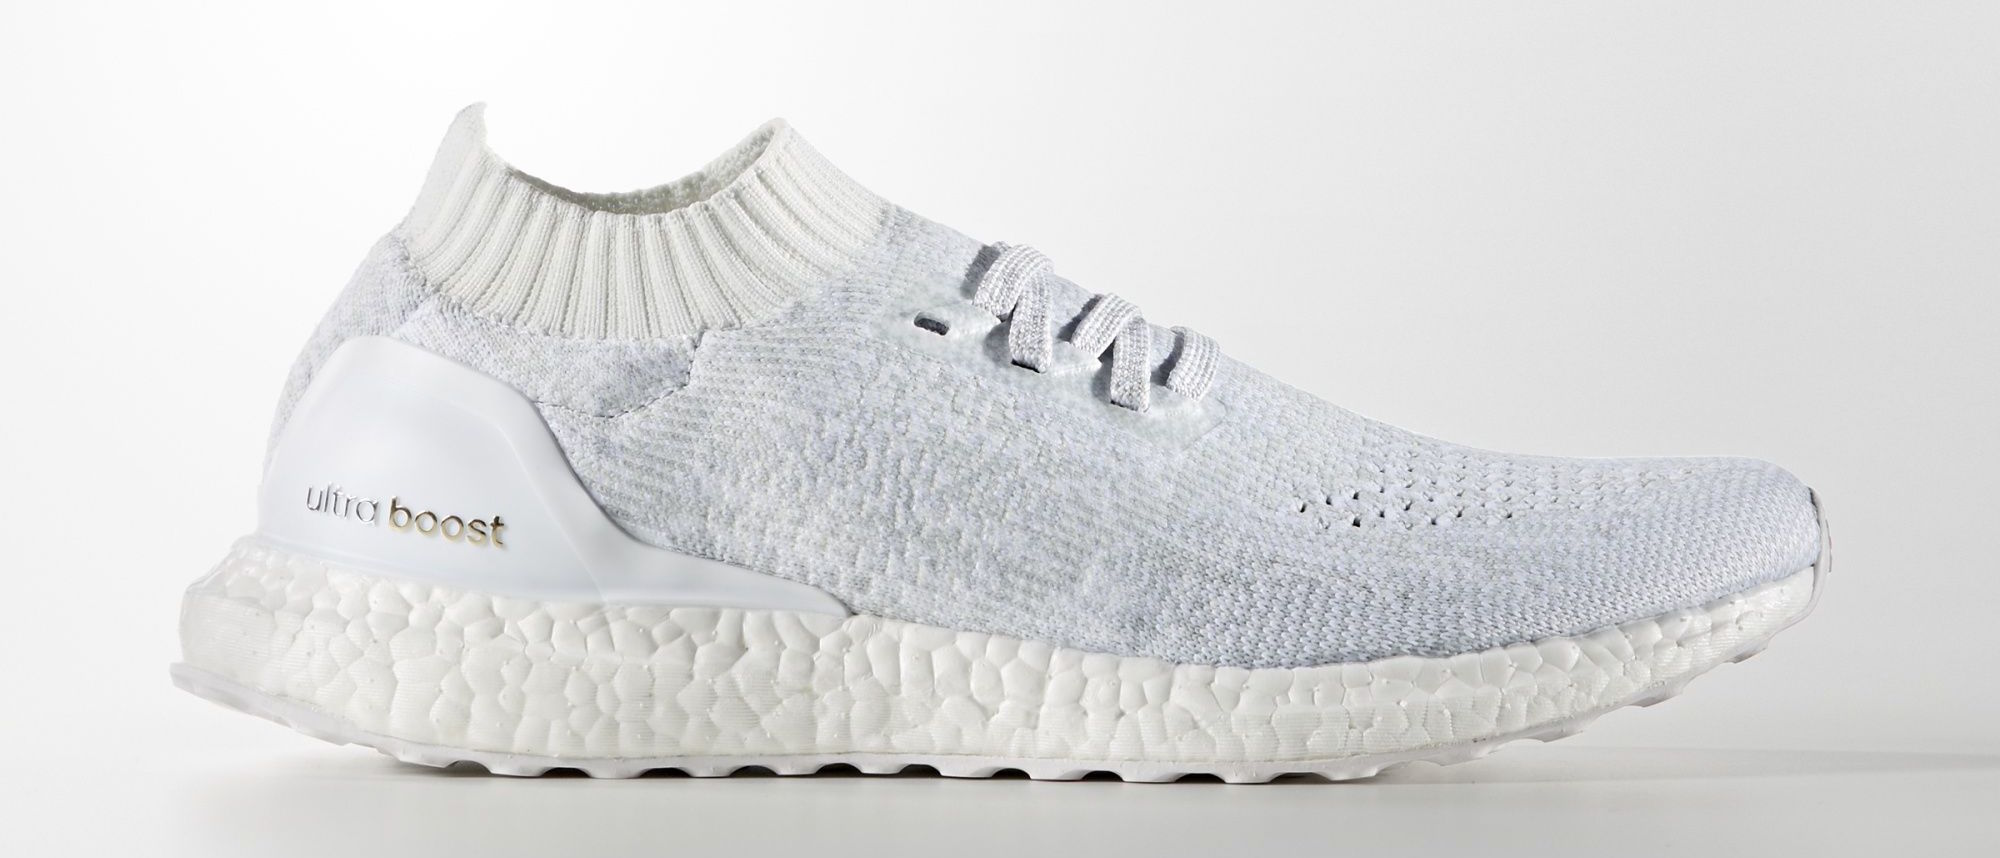 The adidas Ultra Boost Uncaged is 